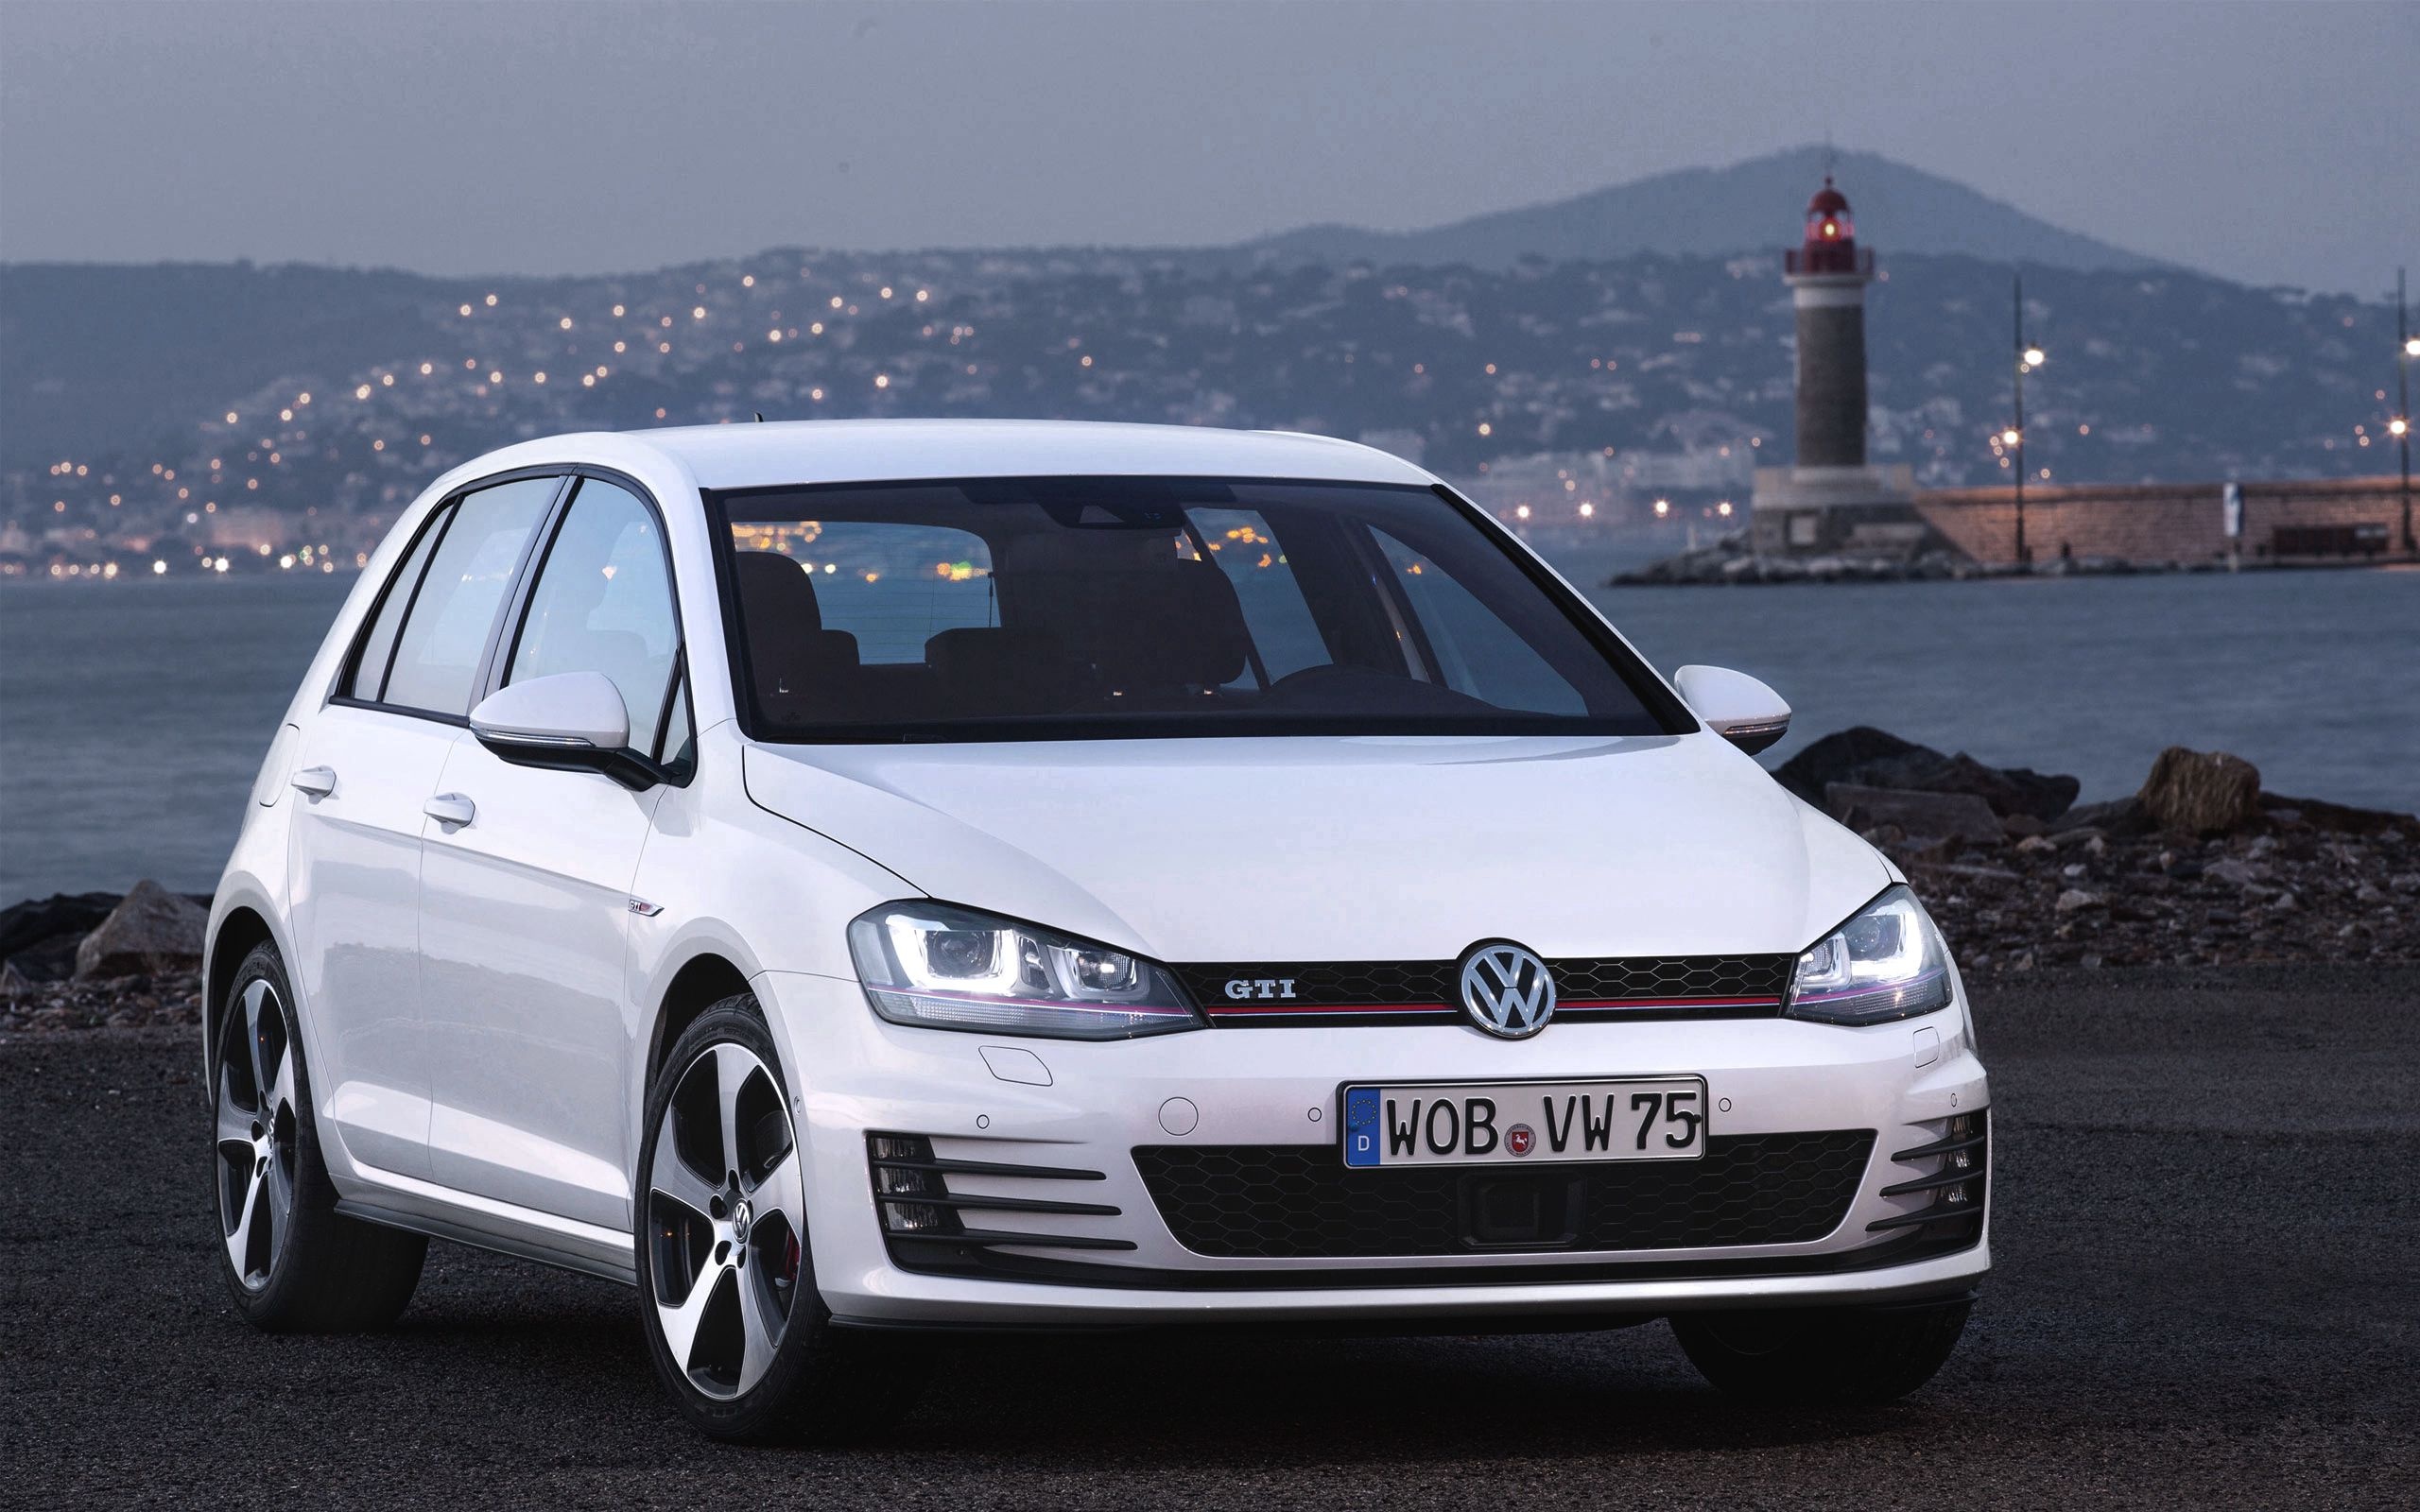 Golf GTI: A 3 or 5-door hatchback produced by Volkswagen since 1975, Lighthouse, Bay. 2560x1600 HD Wallpaper.